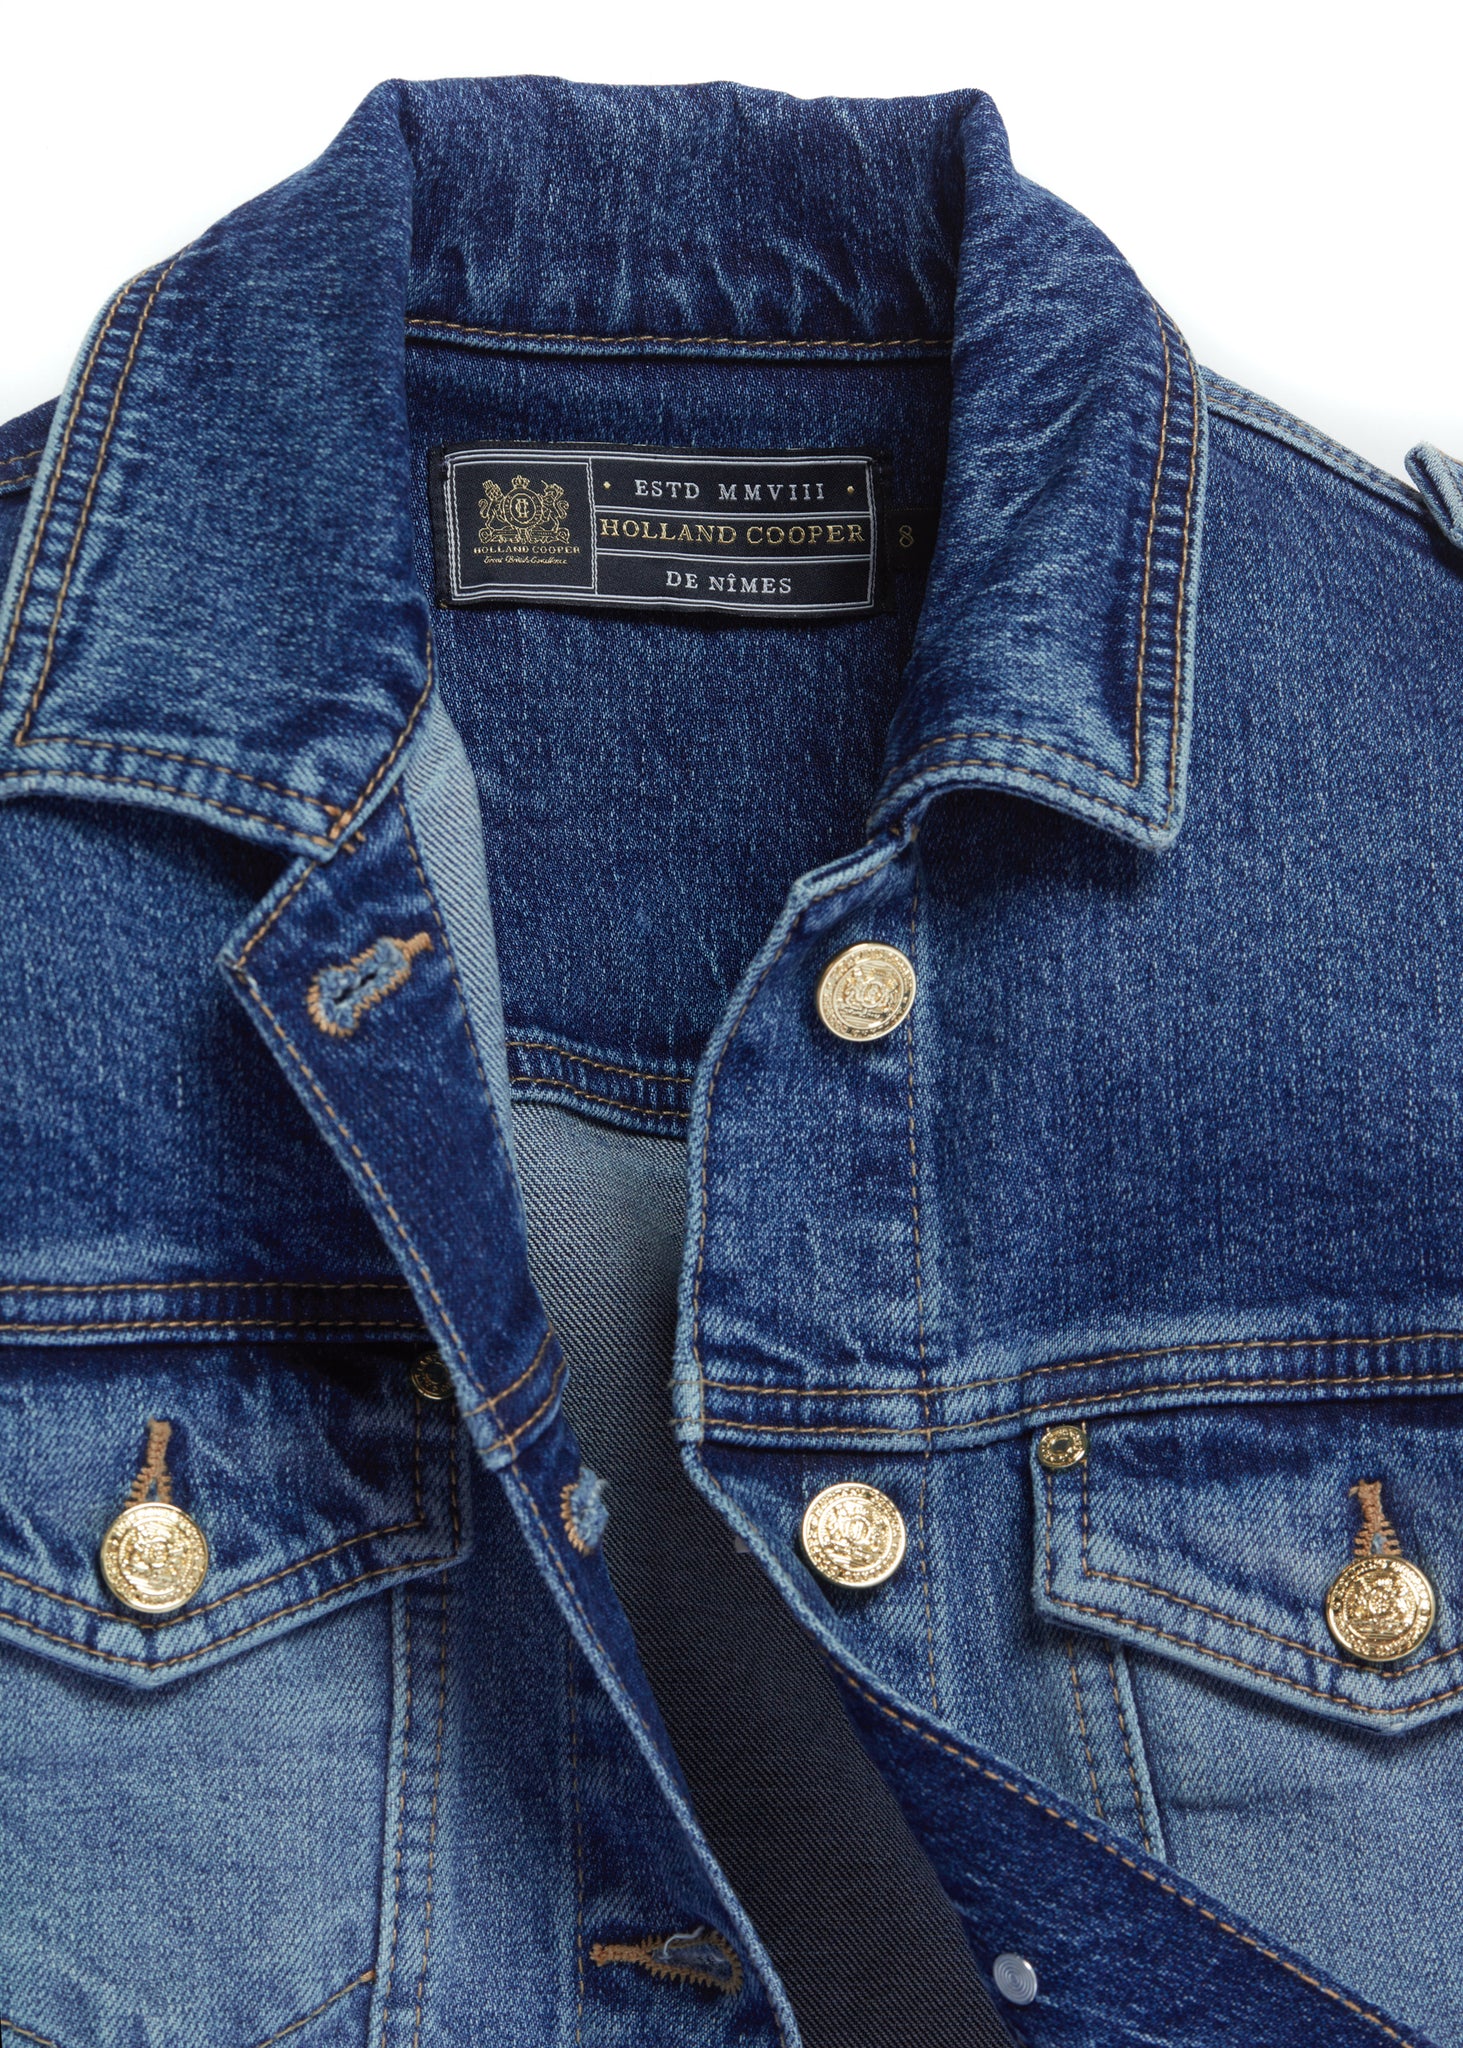 classic indigo denim jacket waist length with gold buttons on front, pockets and cuffs with holland cooper embroidery on back